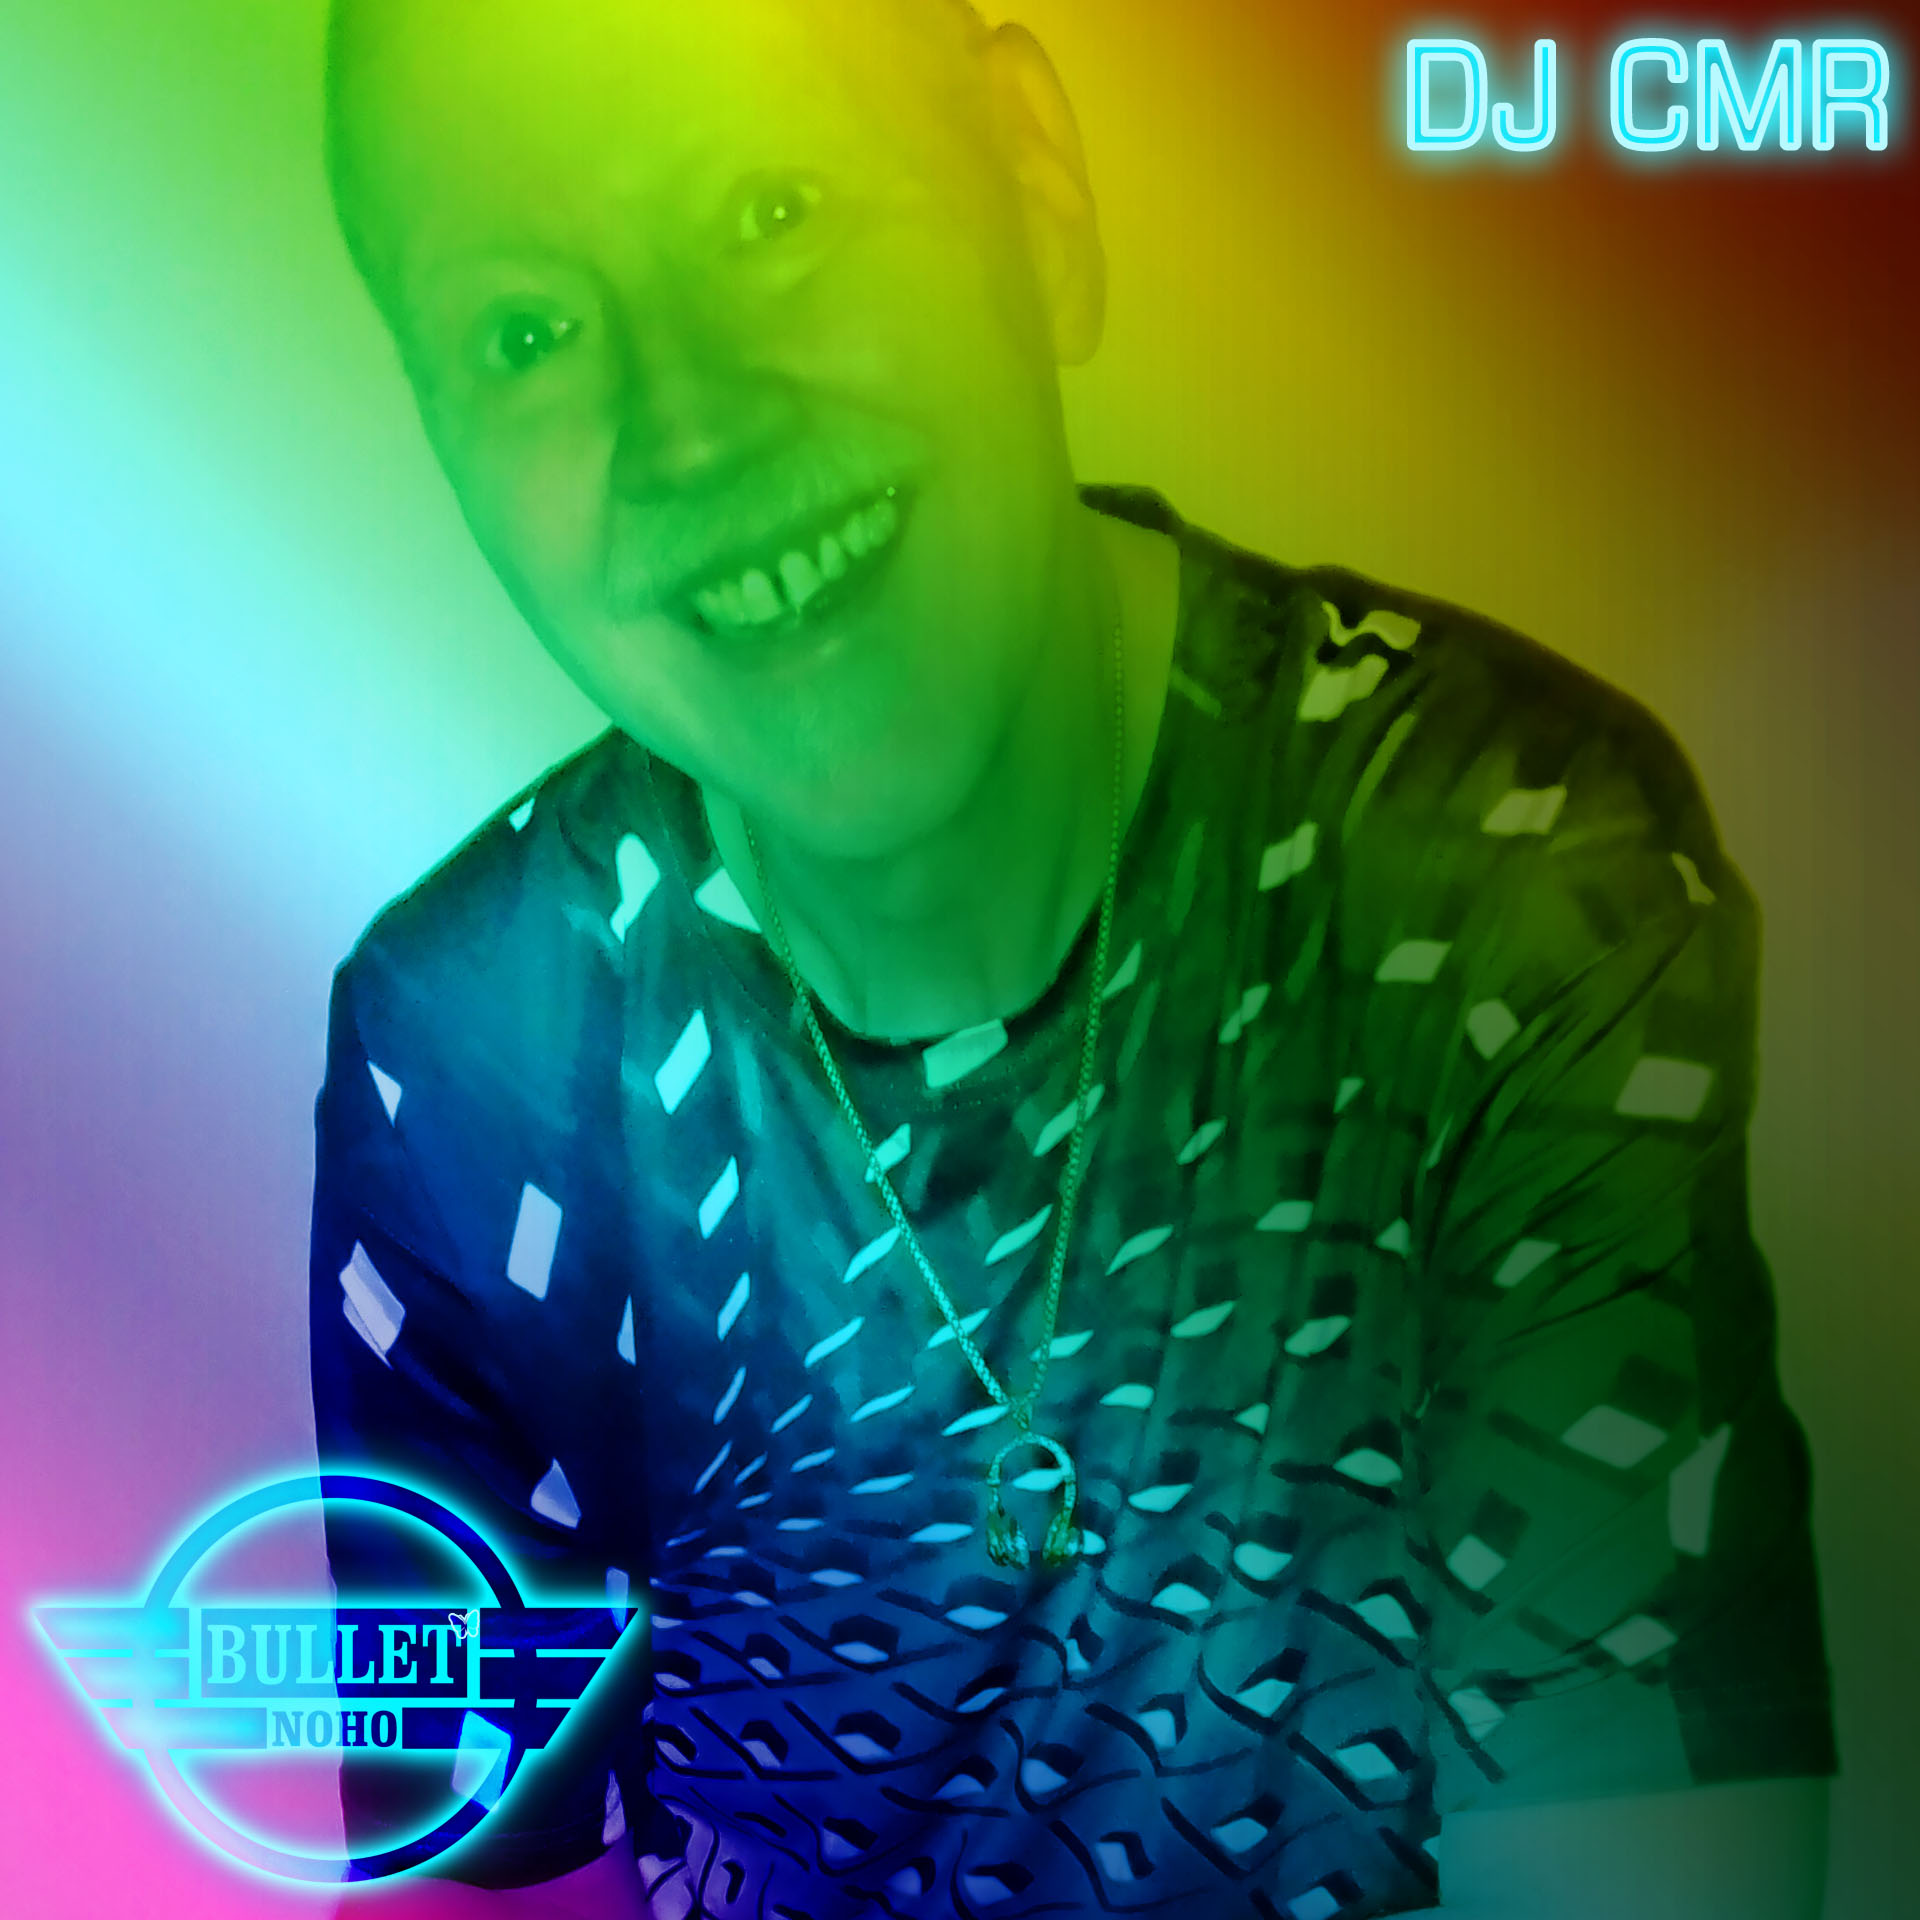 DJ CMR: Friday, August 12, 2022 from 8:00 PM to 2:00 AM